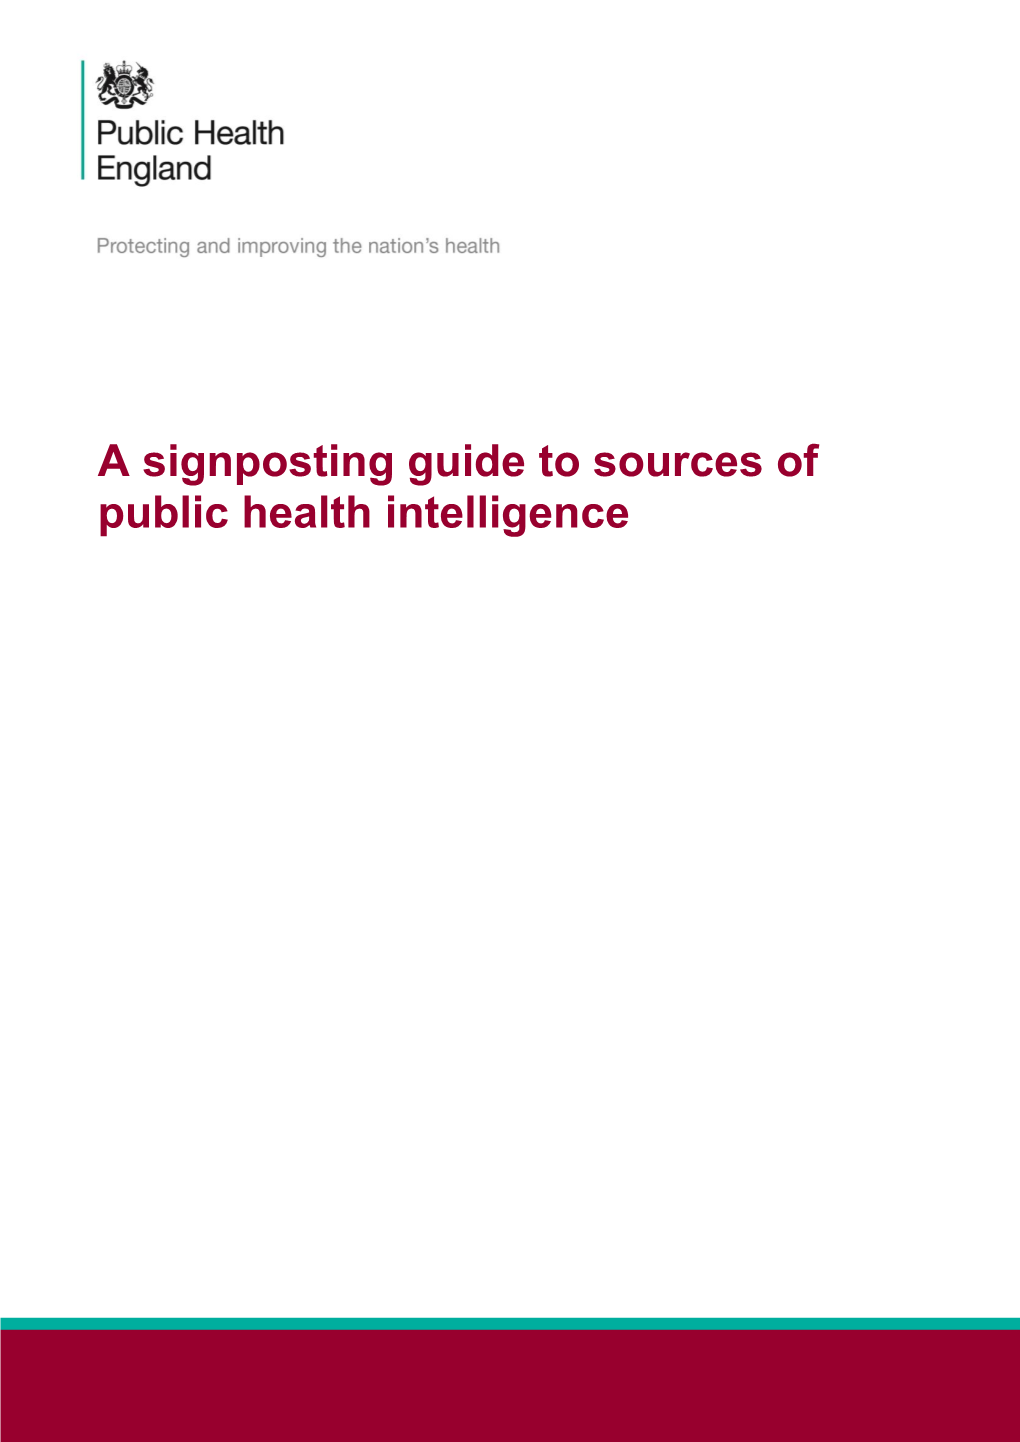 A Signposting Guide to Sources of Public Health Intelligence